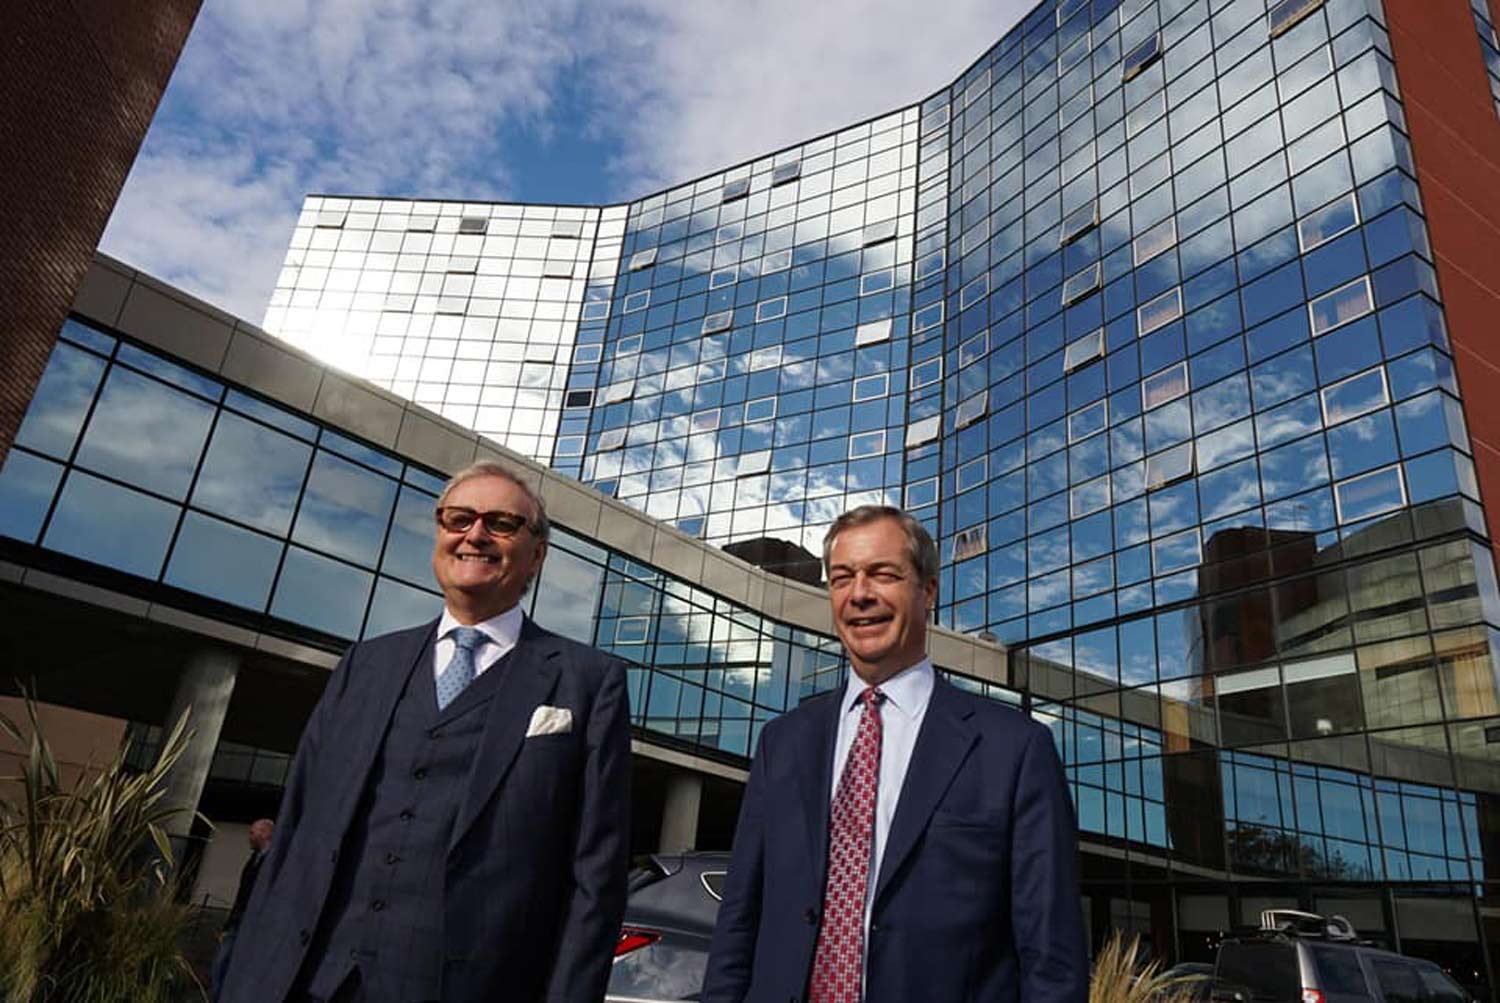 John Longworth, Chairman and Nigel Farage, Deputy Chairman of the Leave Means Leave Campaign